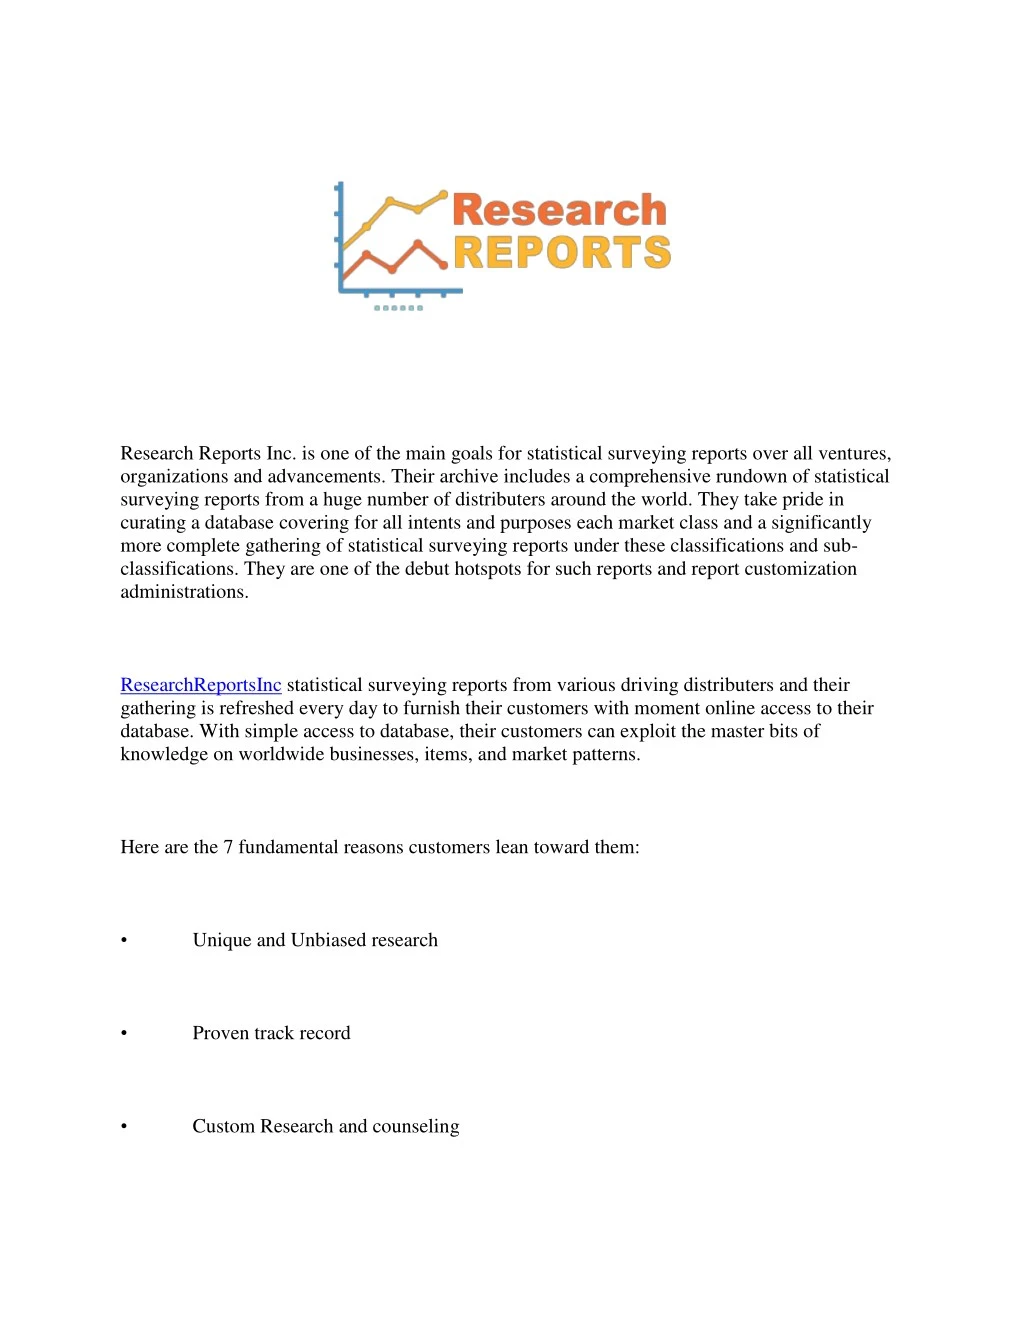 research reports inc is one of the main goals